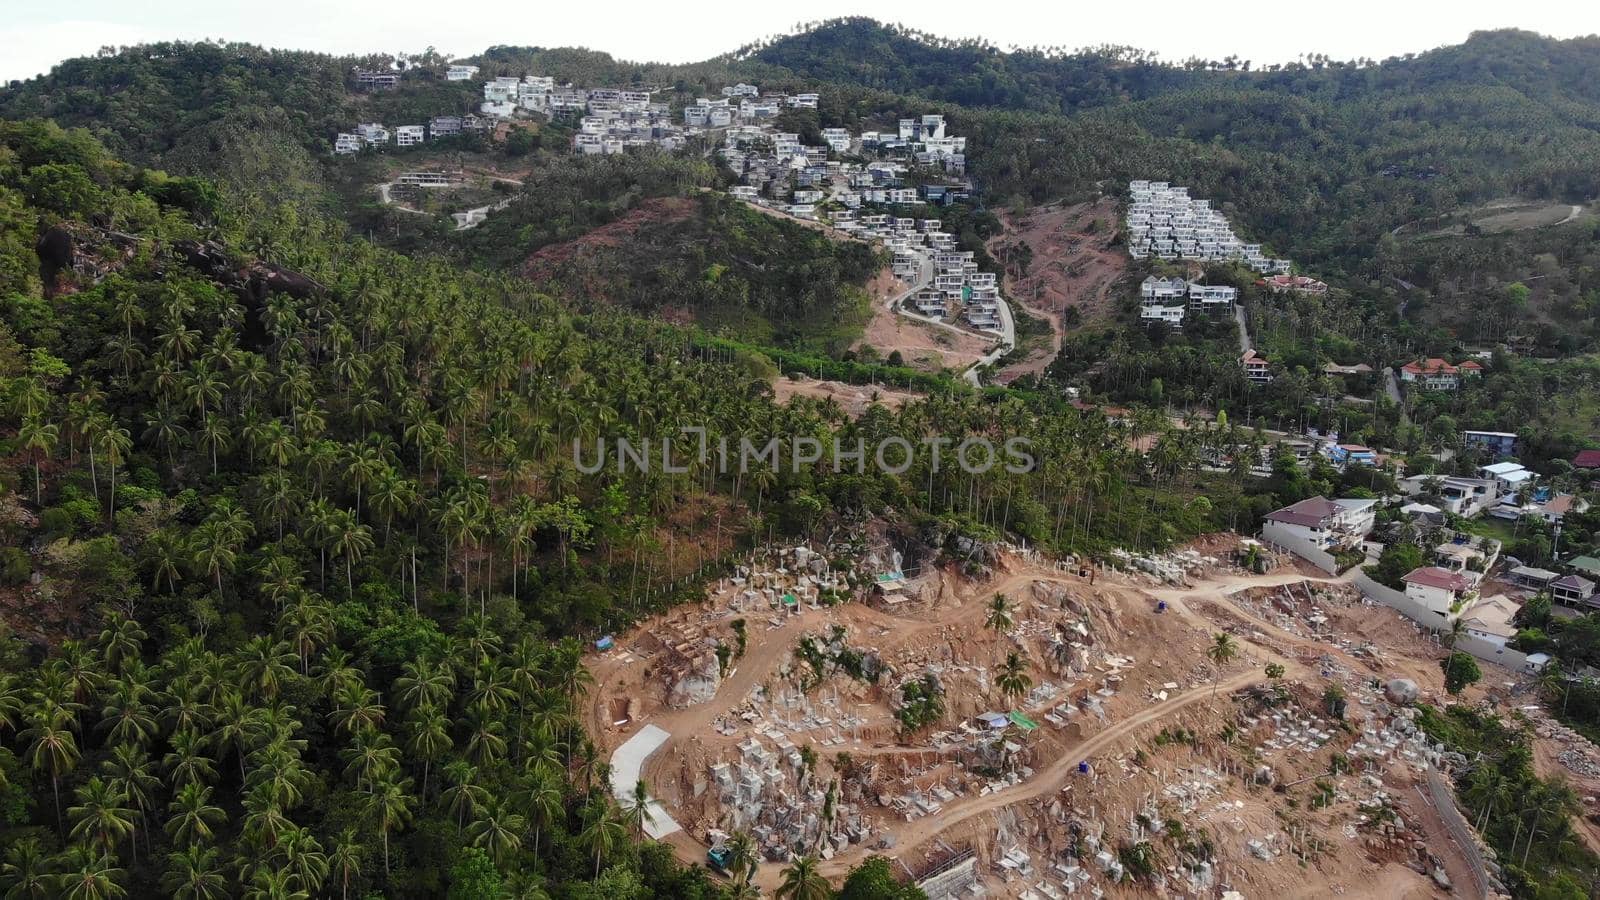 Tropical terrain covered with endangered forests and luxury villas. Drone view of large tropics with ecosystem disturbance due to buildings and deforestation. Koh Samui. Coconut palm plantations